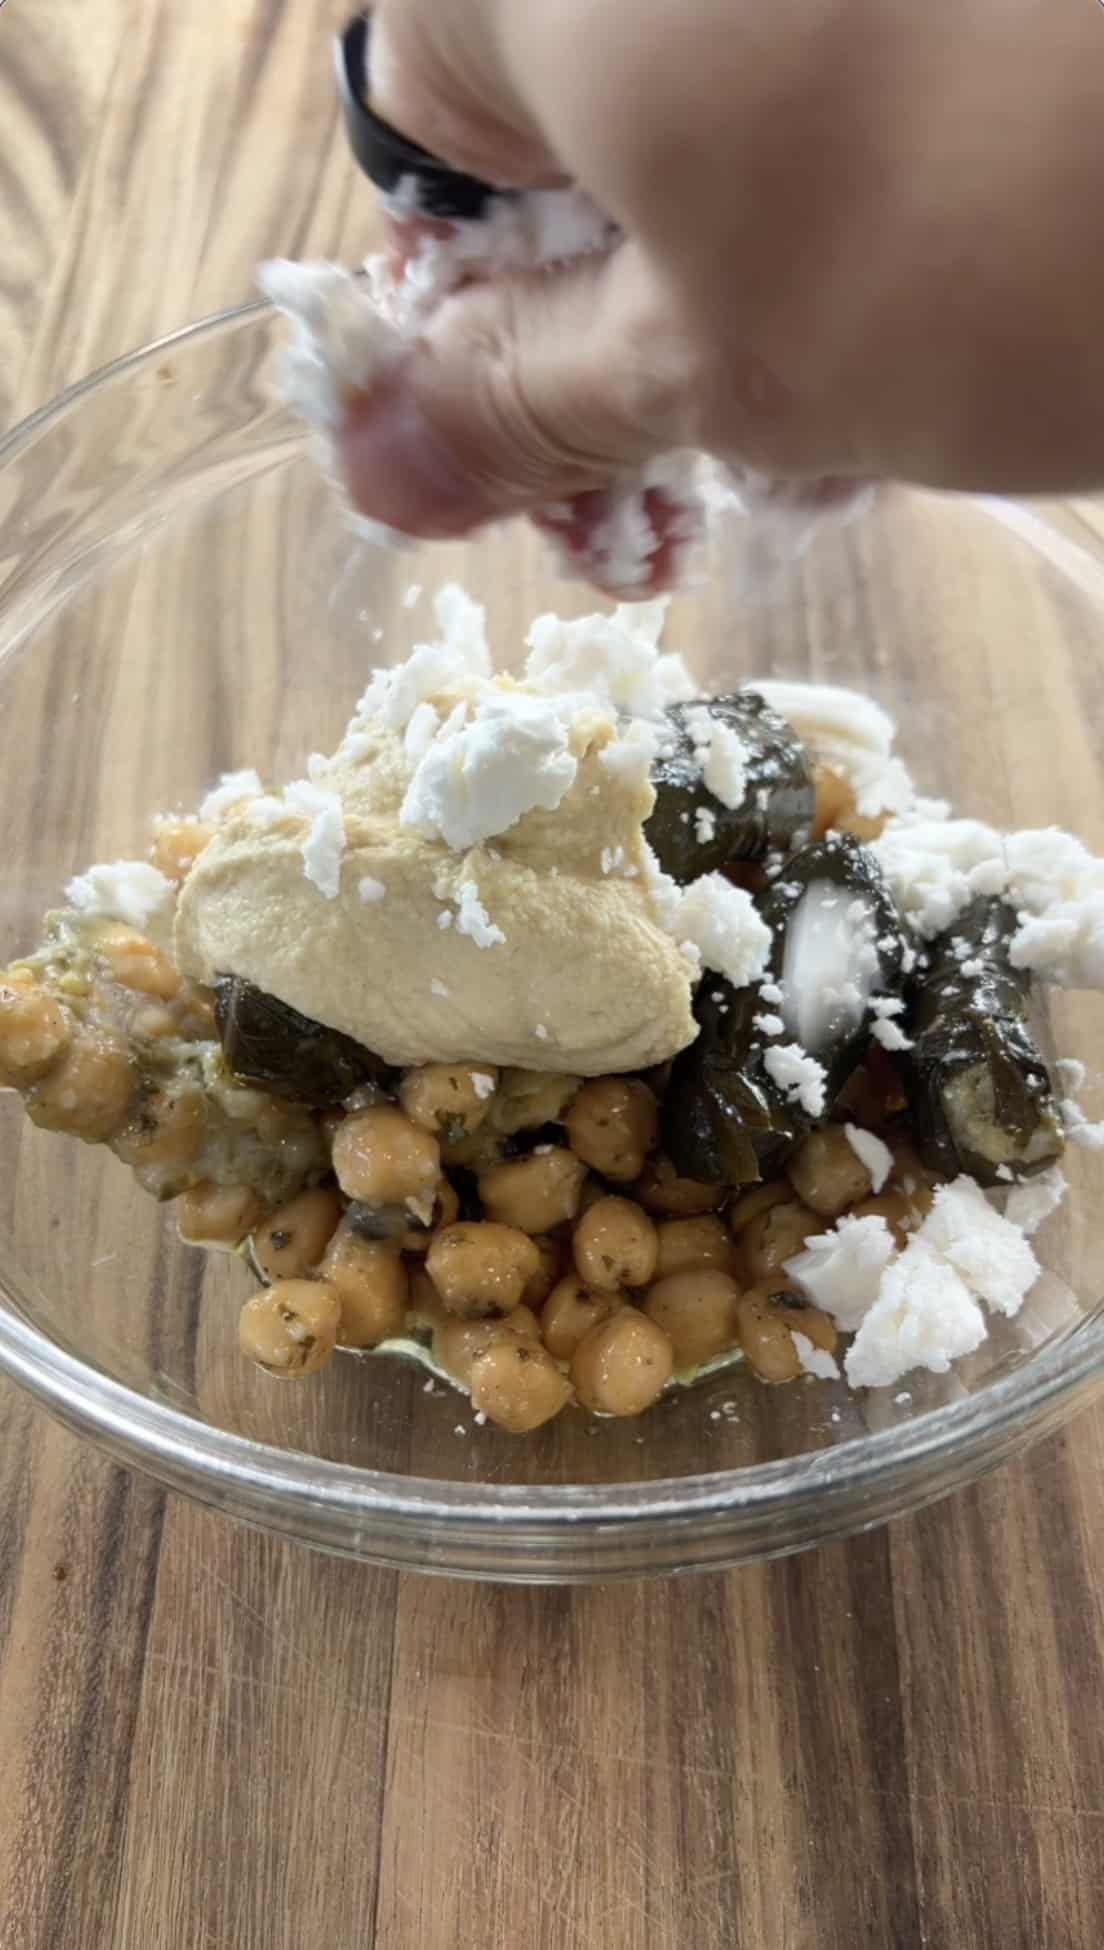 crumbling dairy-free feta into the bowl of hummus, chickpeas, and dolmas